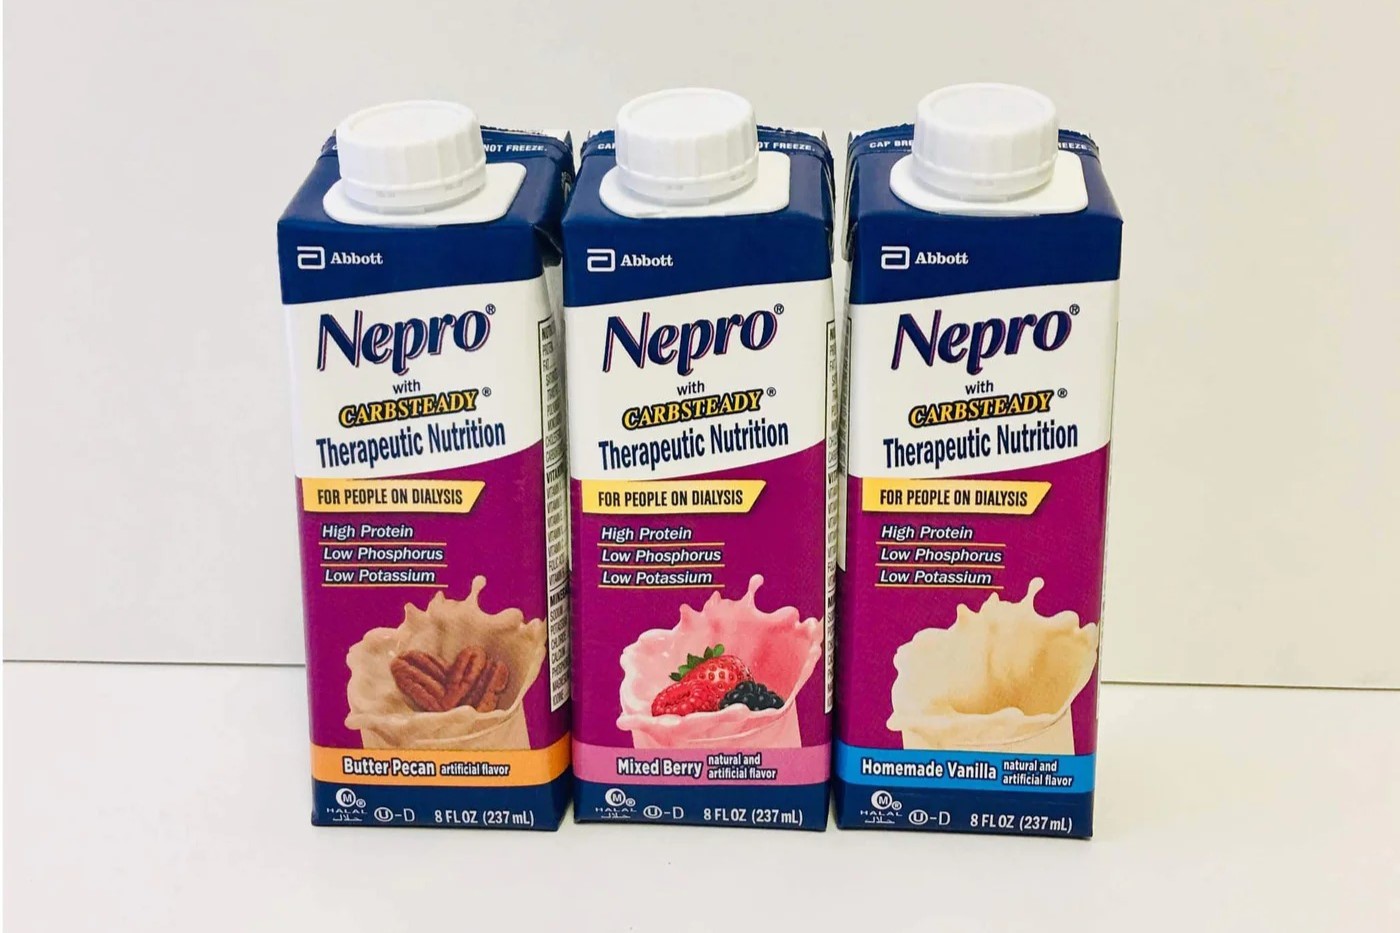 19-nepro-nutrition-facts